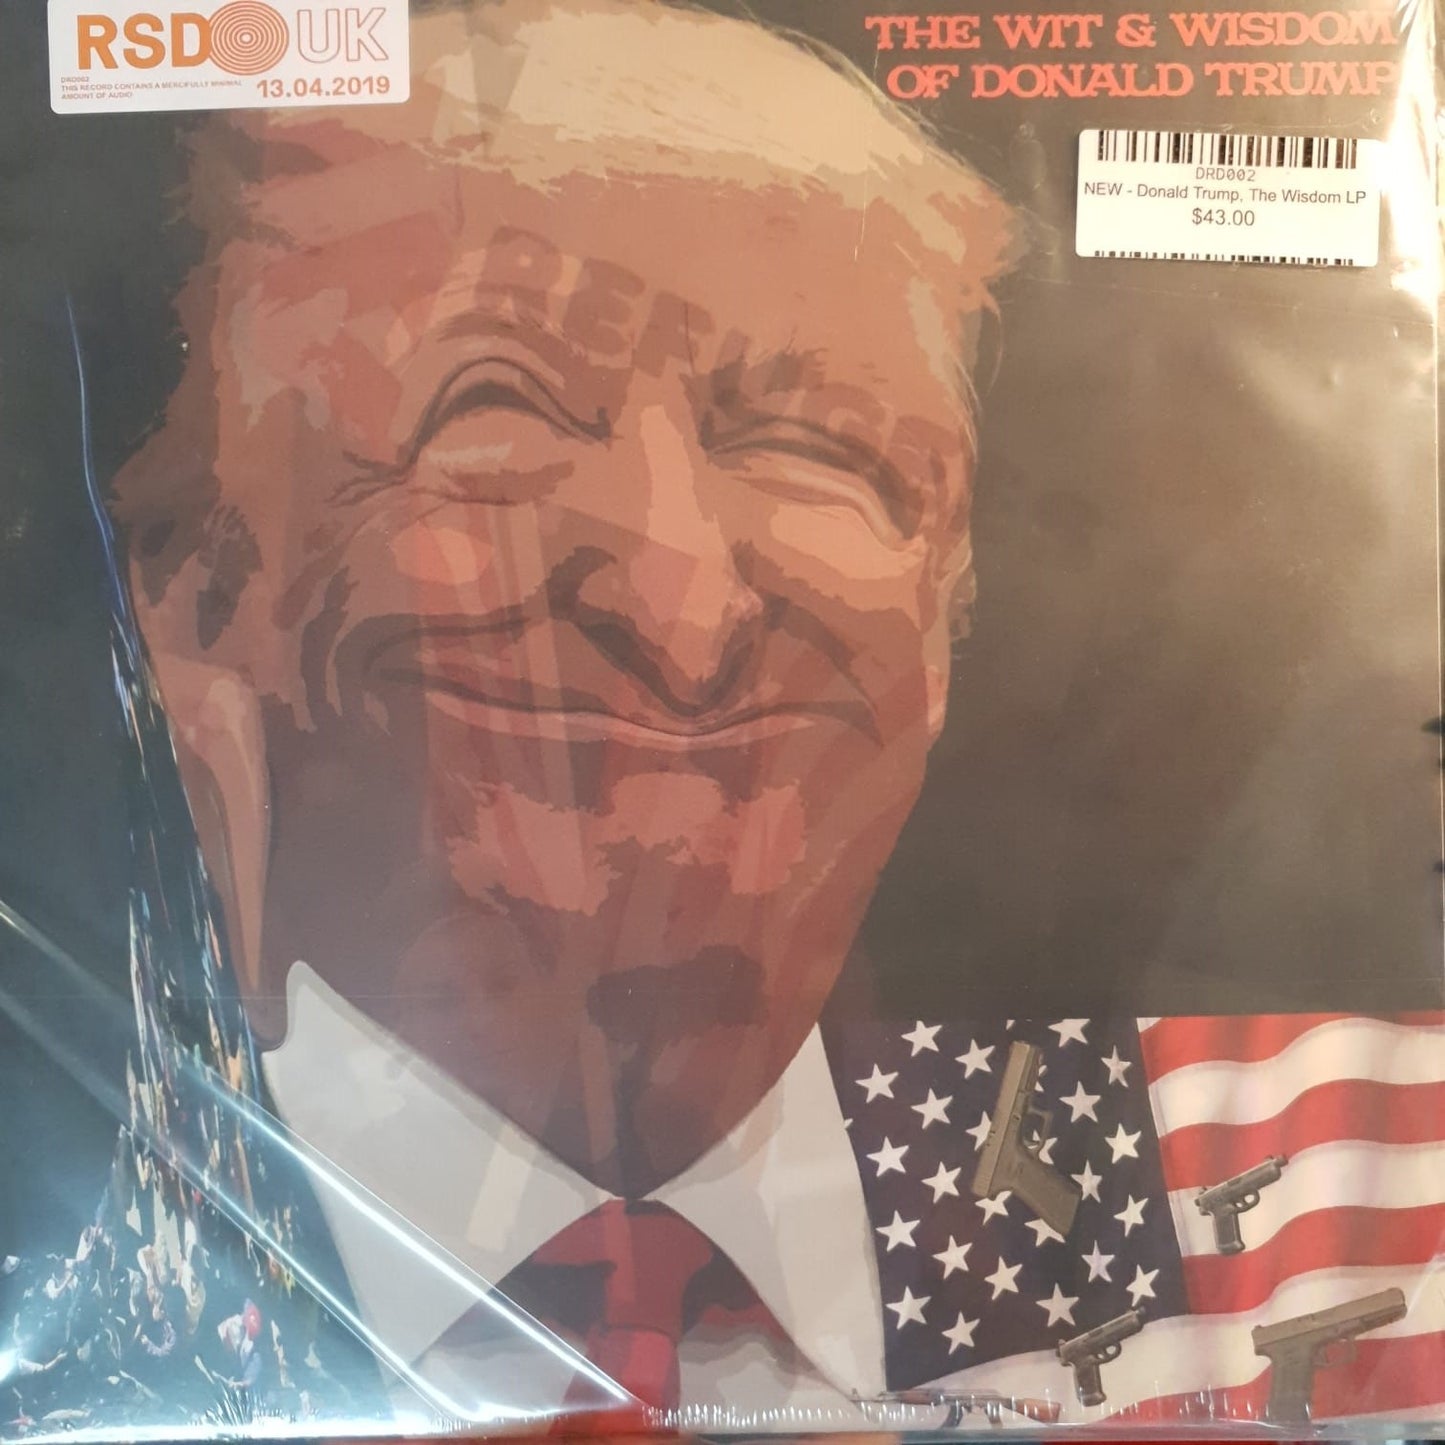 NEW - Donald Trump, The Wit and The Wisdom LP